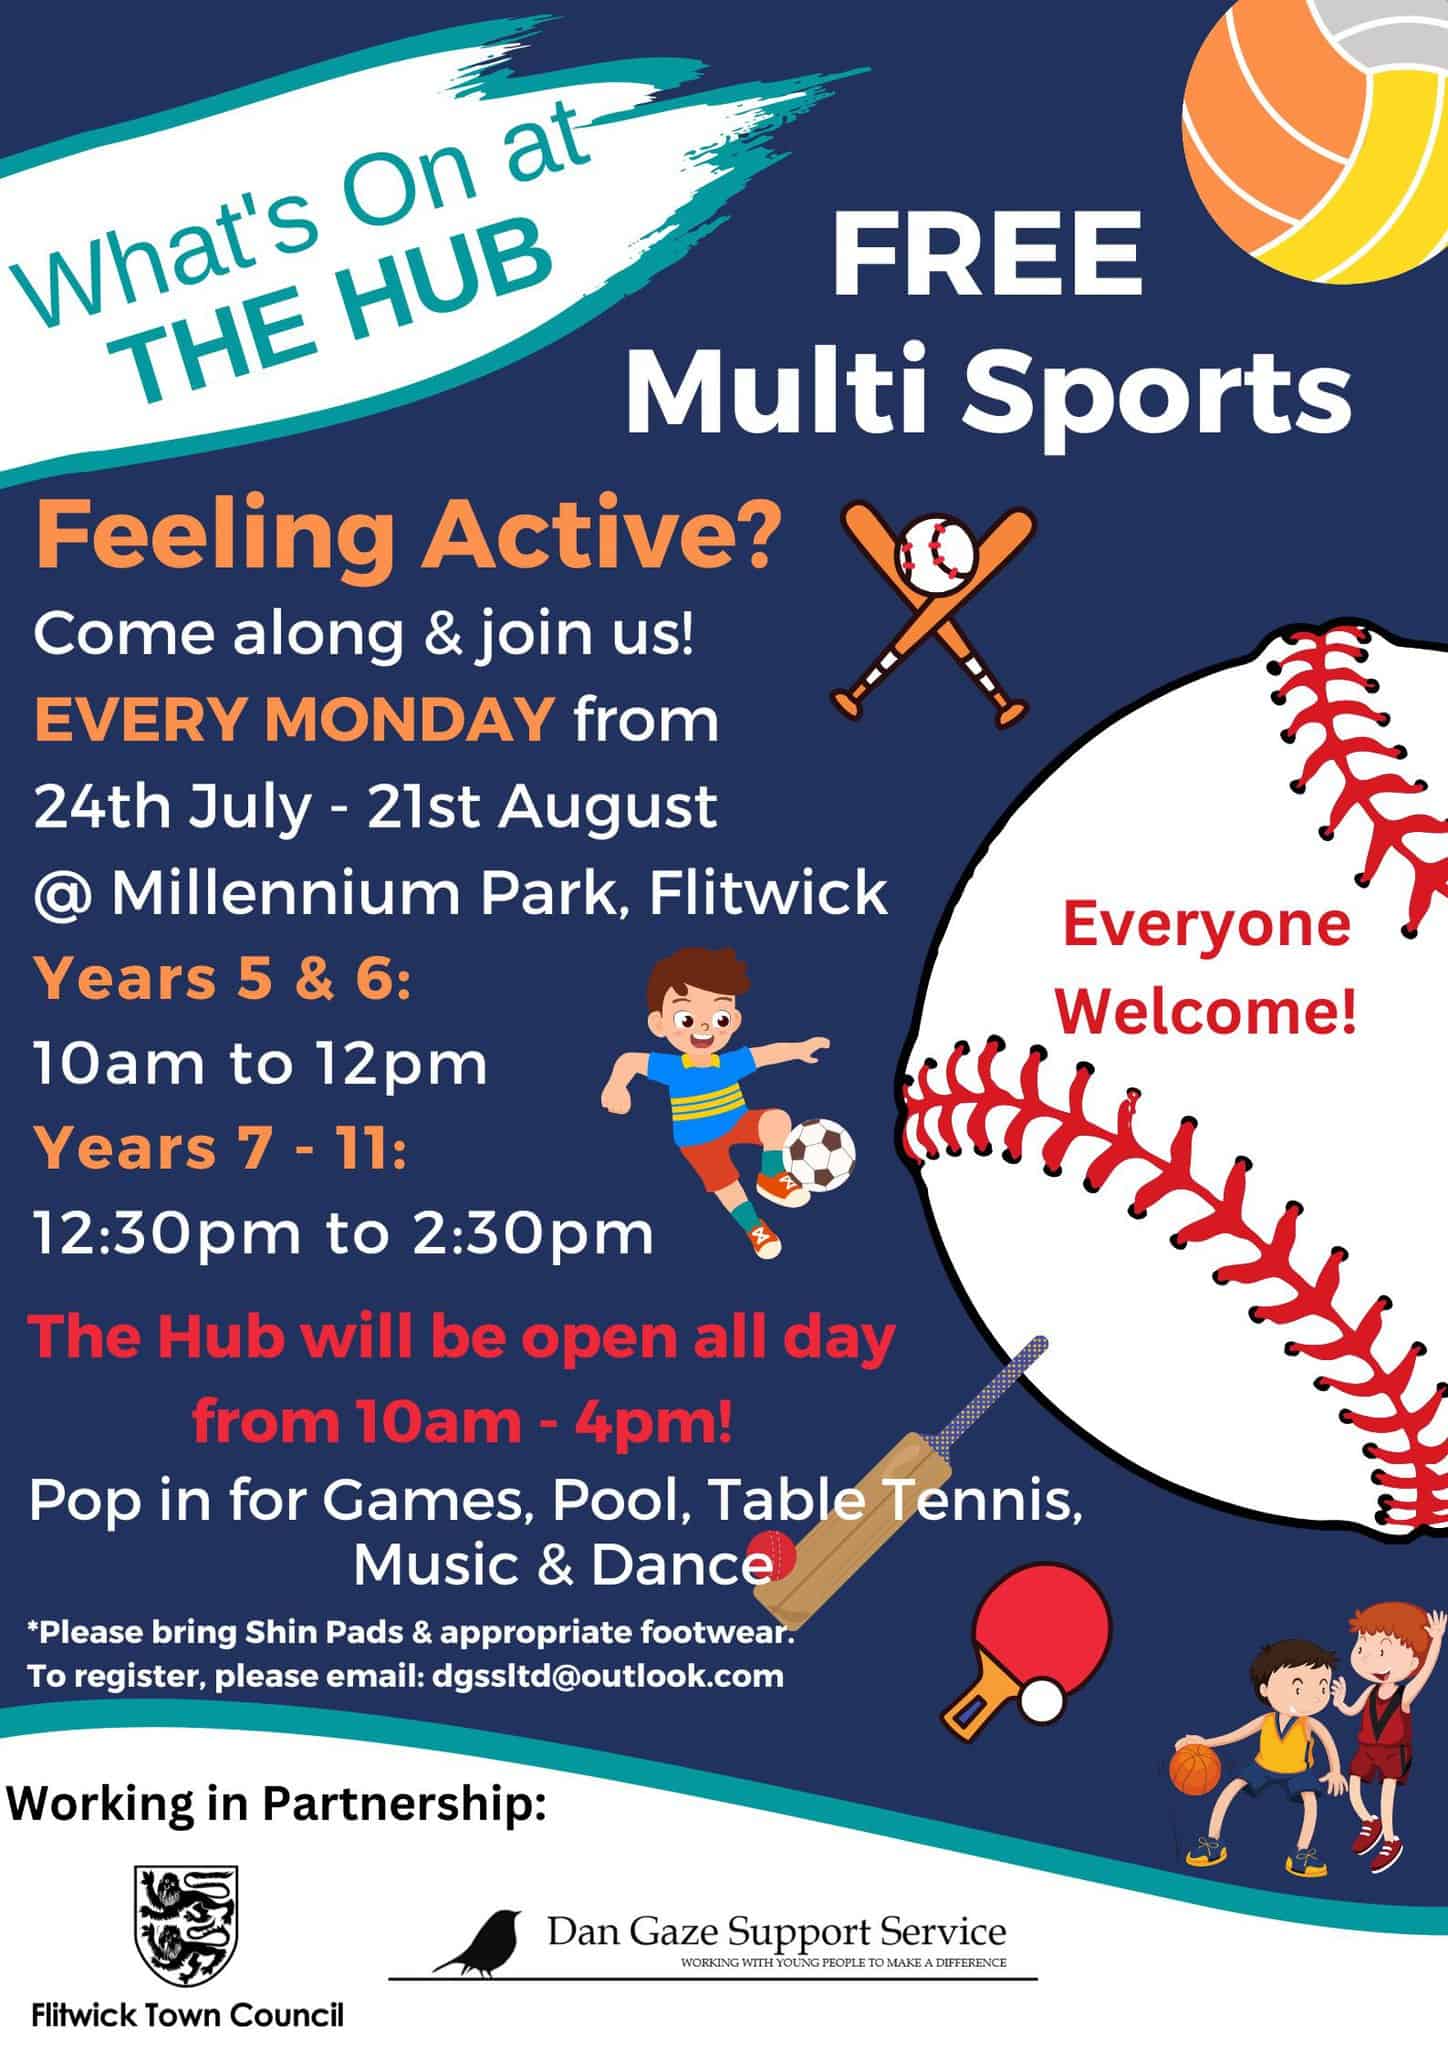 Poster promoting sports for 5-11 year olds